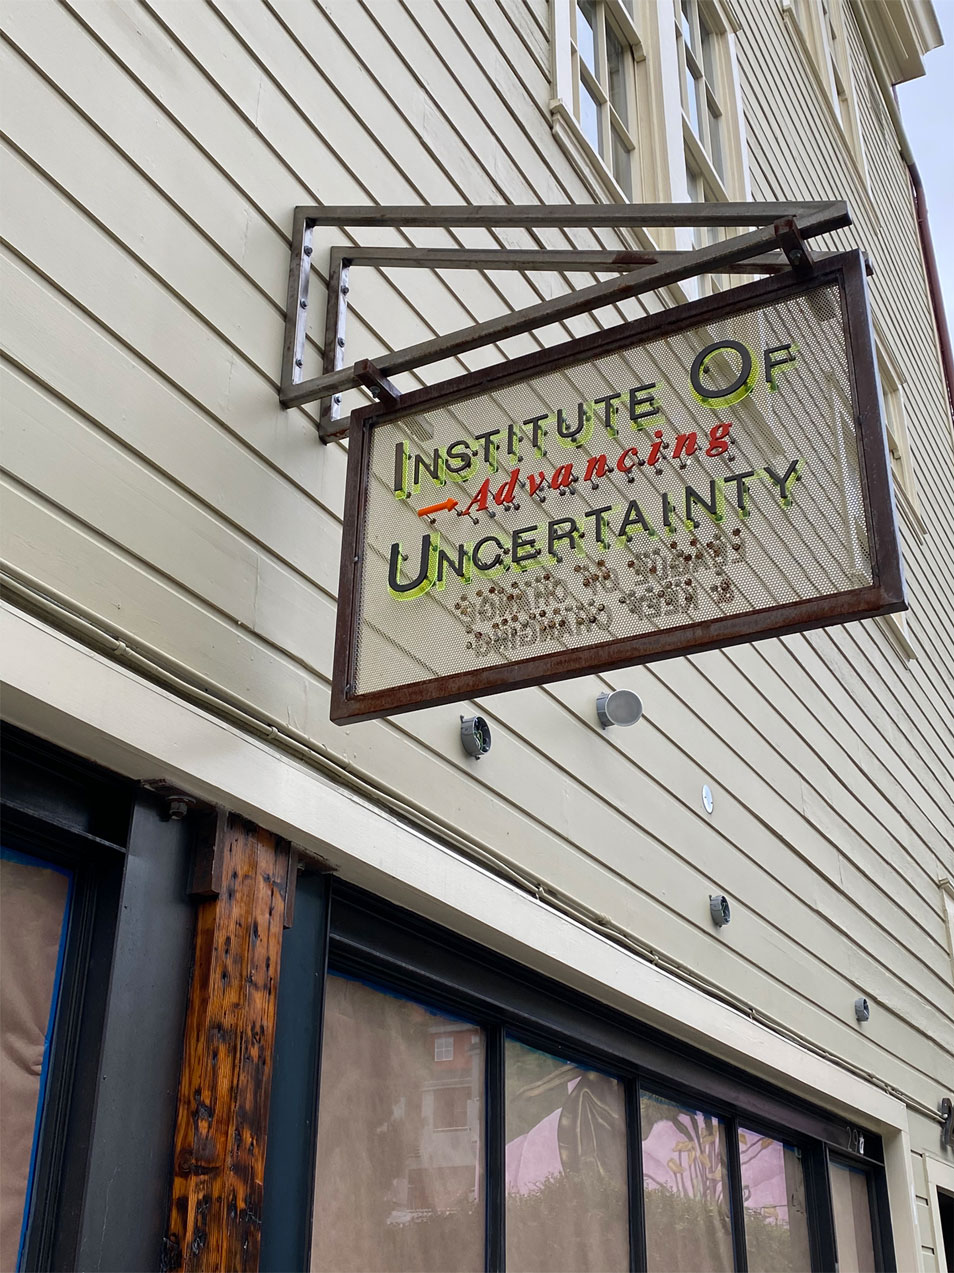 a storefront sign for the "Institute of Advancing Uncertainty"